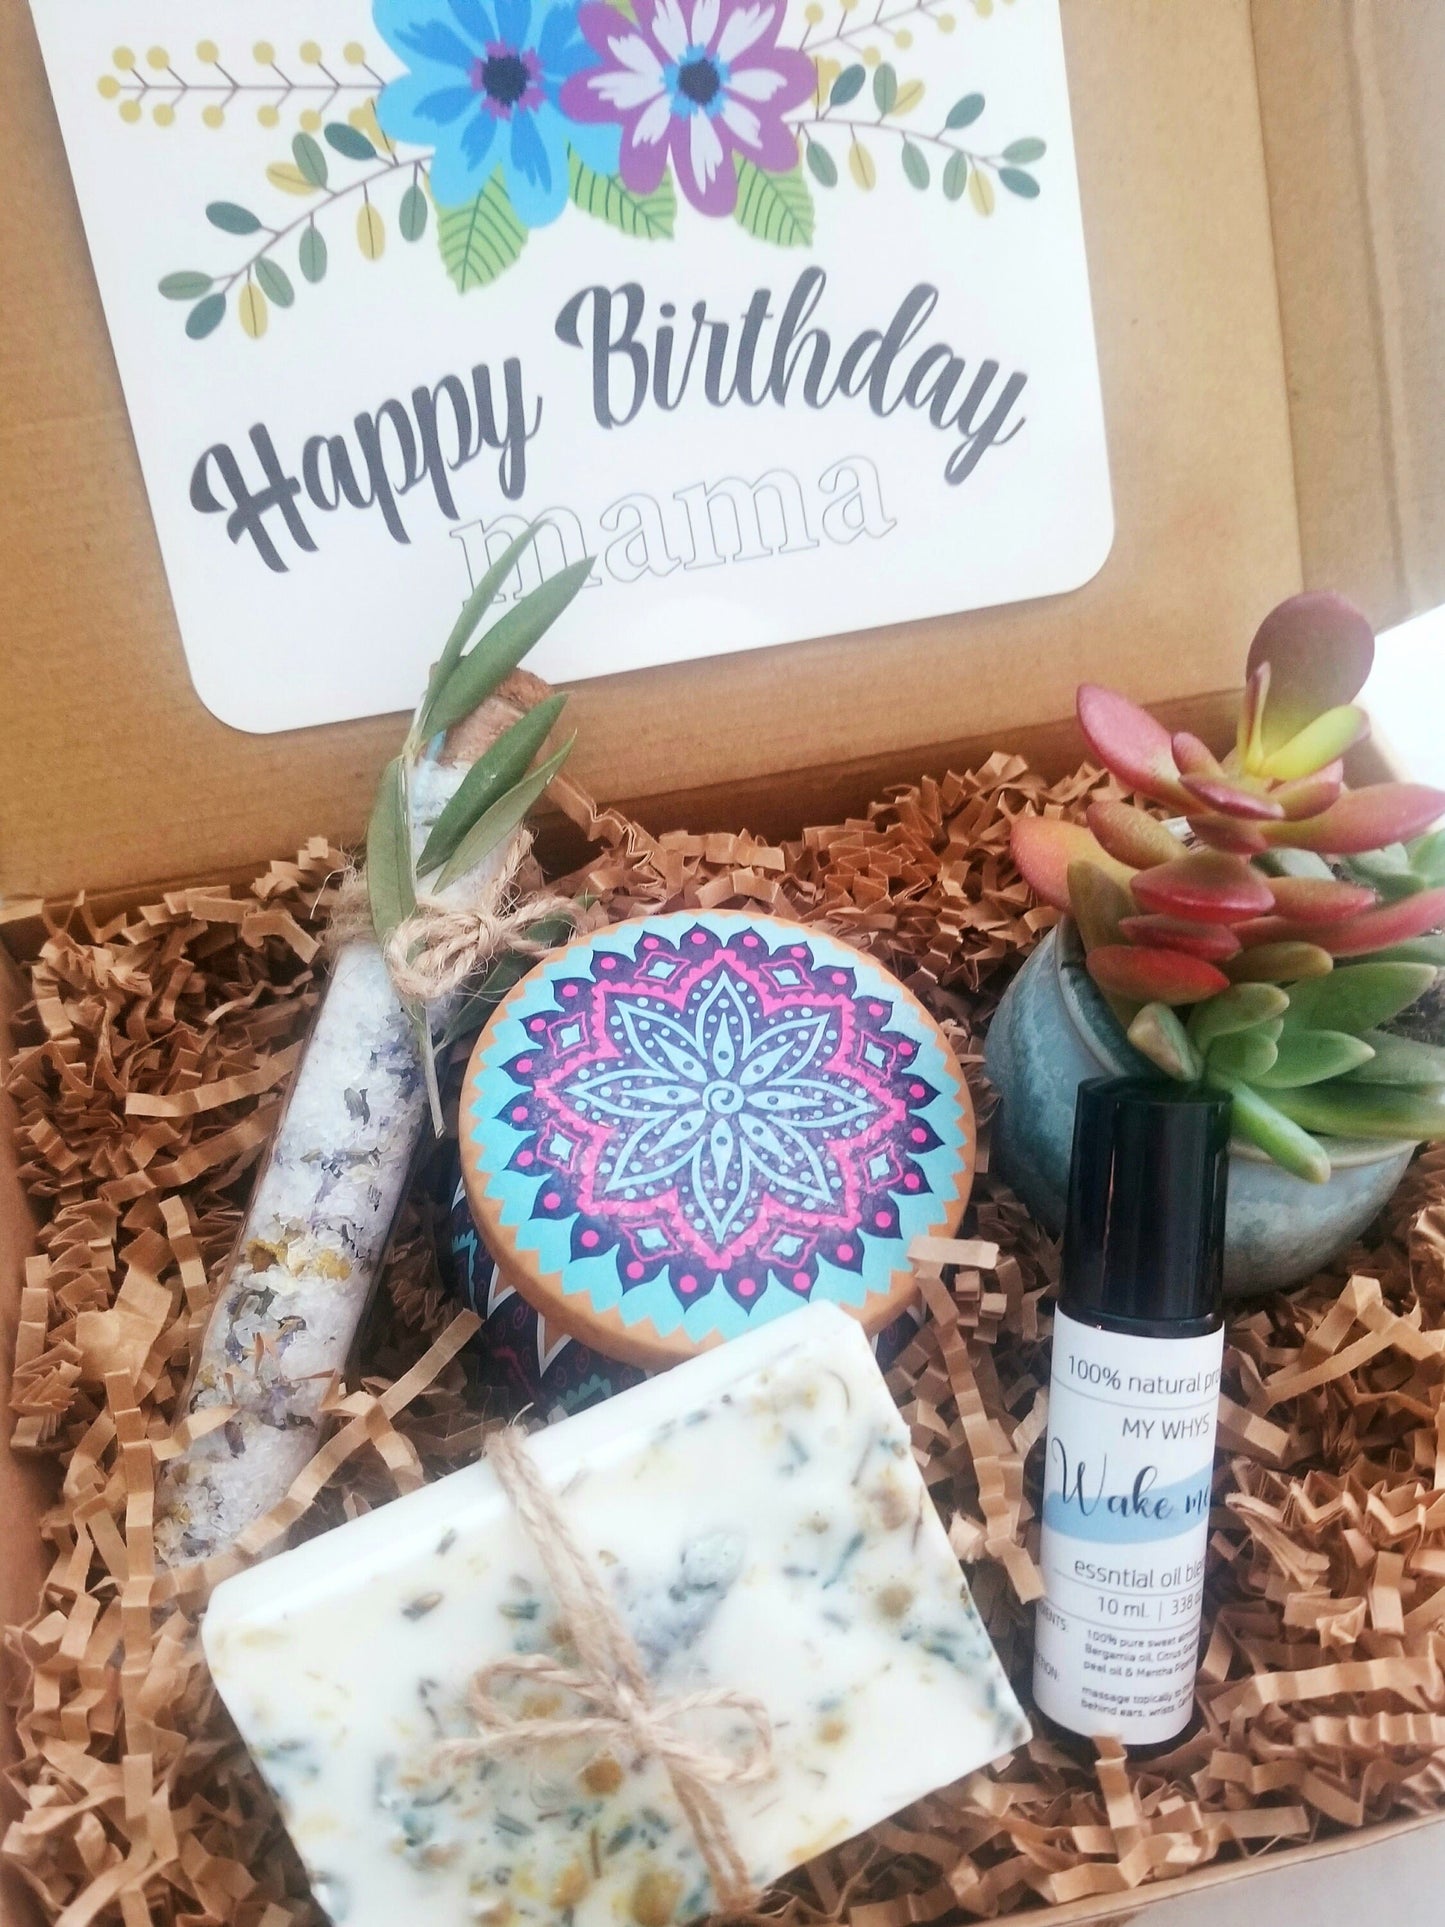 Thank you gift set, care package 100% natural products